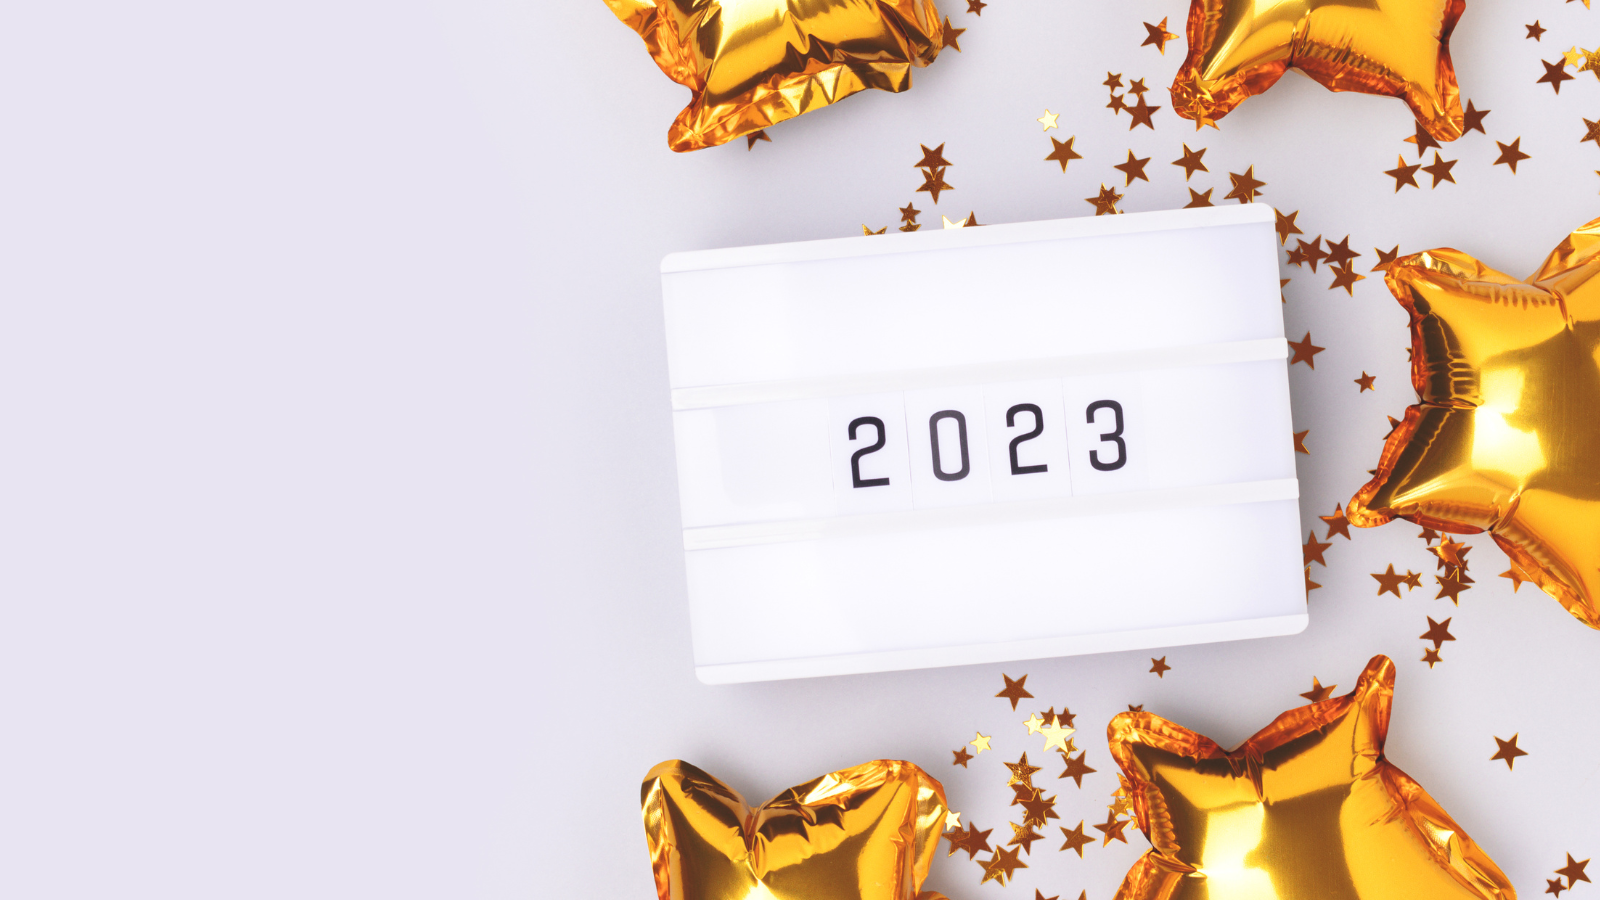 4 Marketing Trends and Predications for 2023 